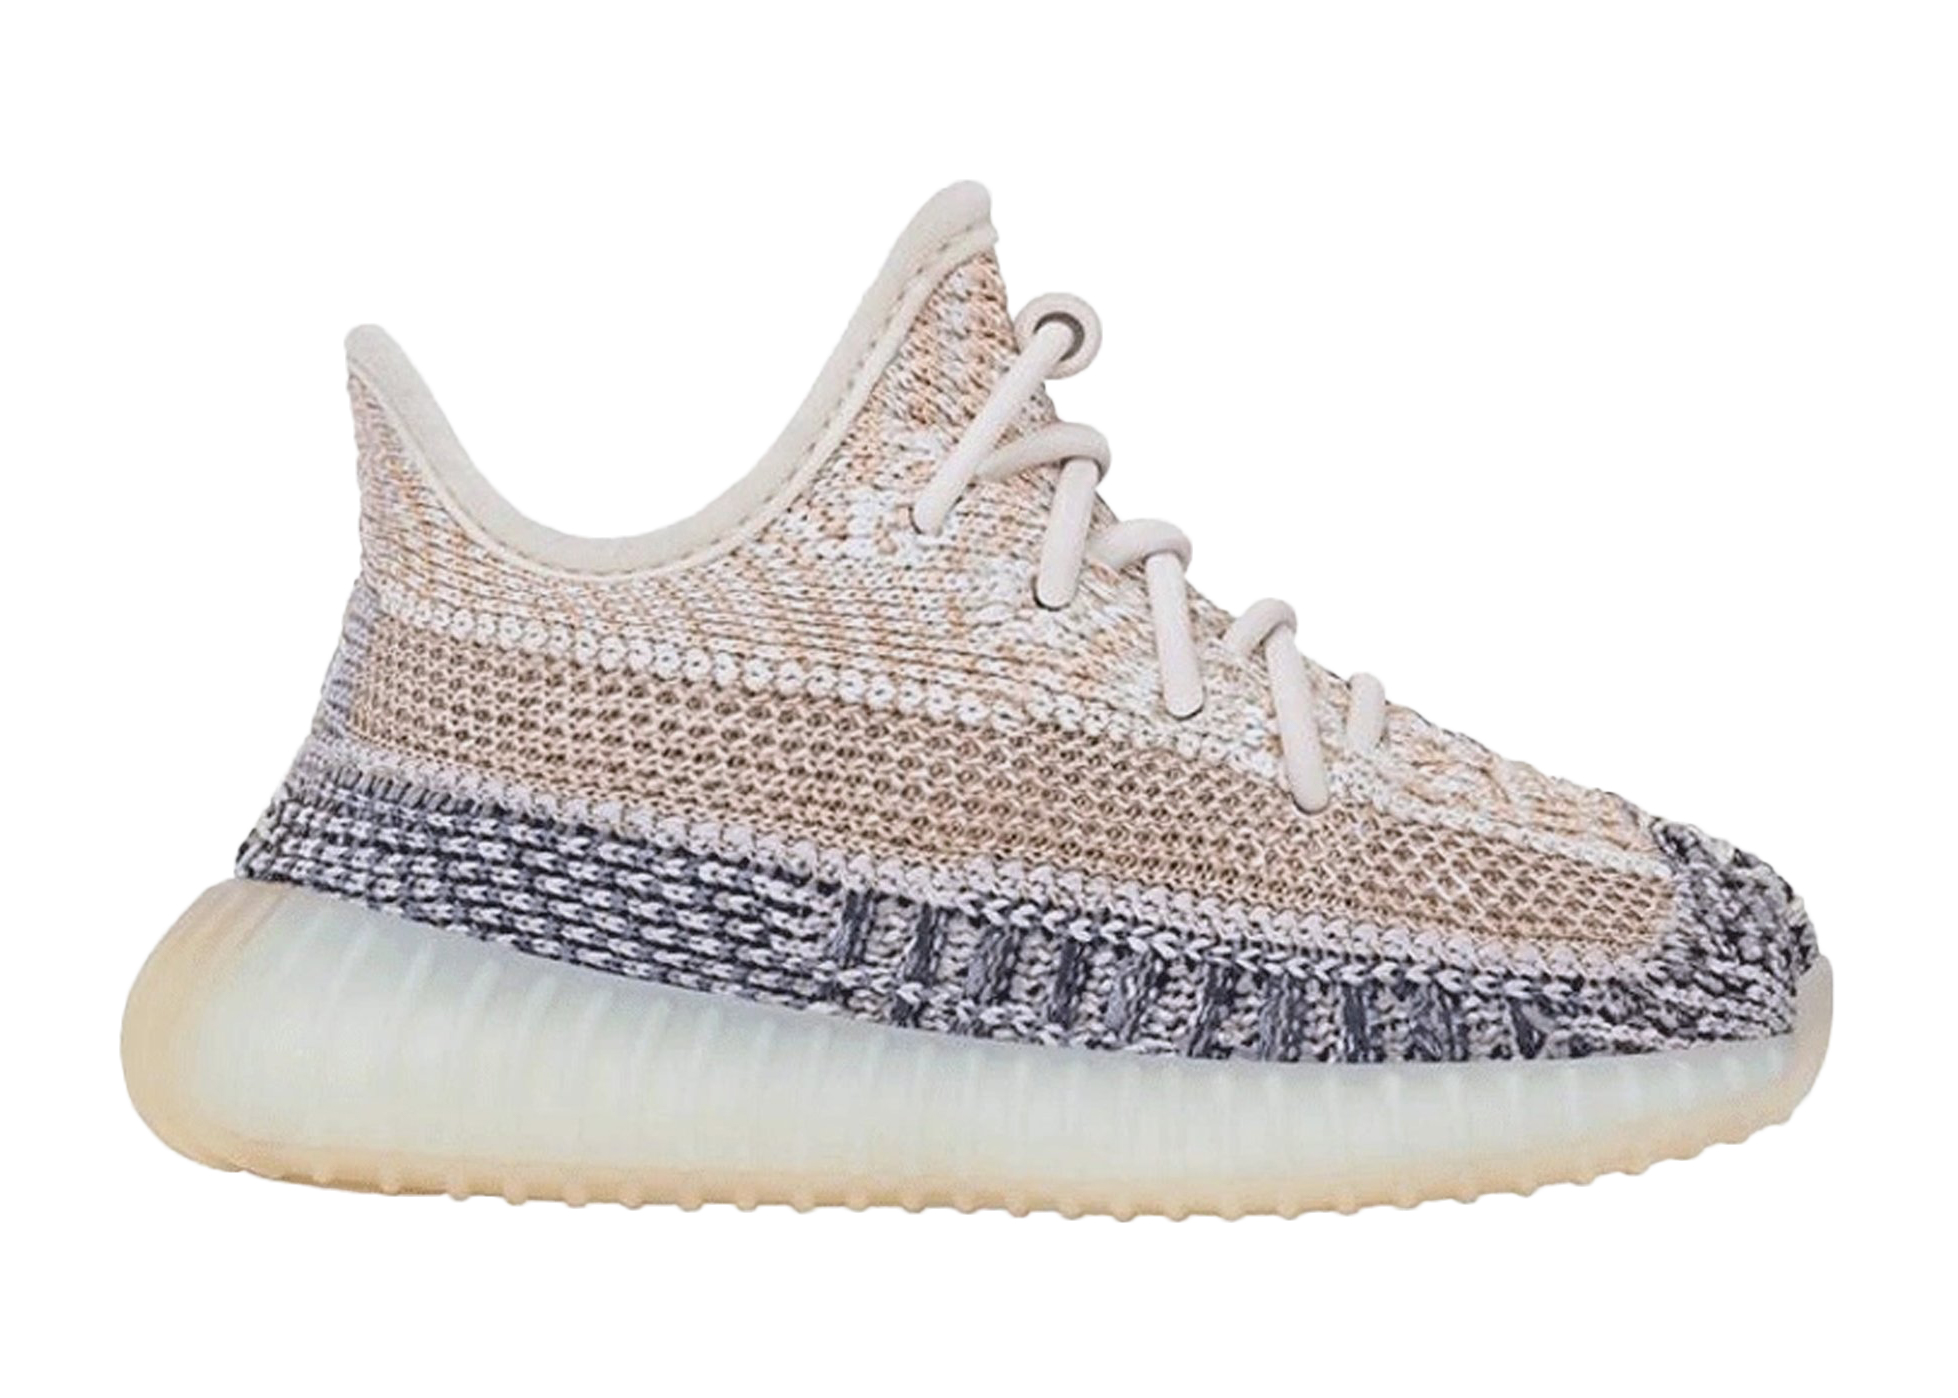 adidas Yeezy Boost 350 V2 Ash Pearl (Infants) Infant - GY7735 - US